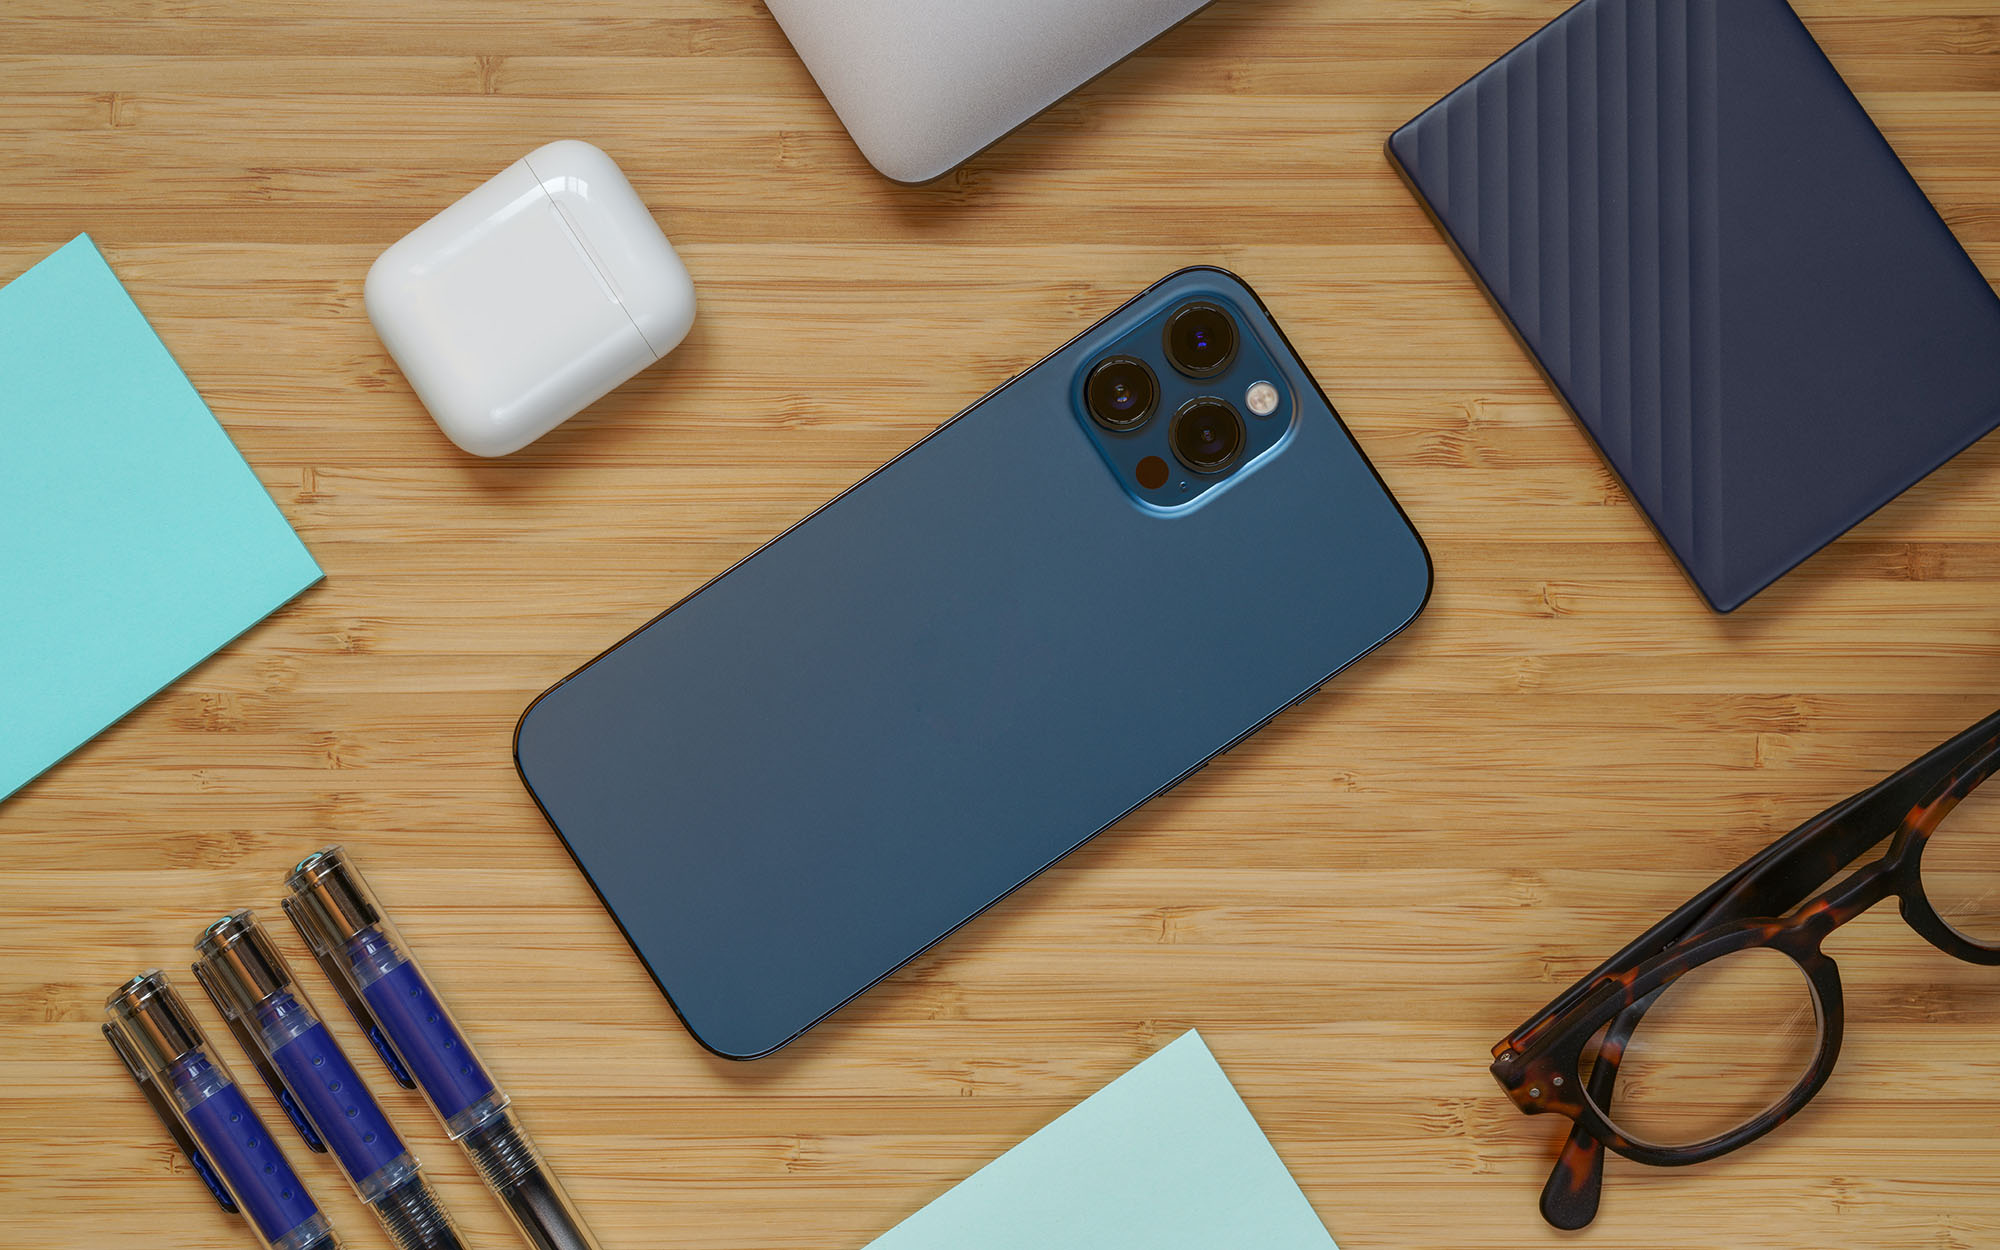 12 Best iPhone 12 Cases and Covers You Can Buy (2021)